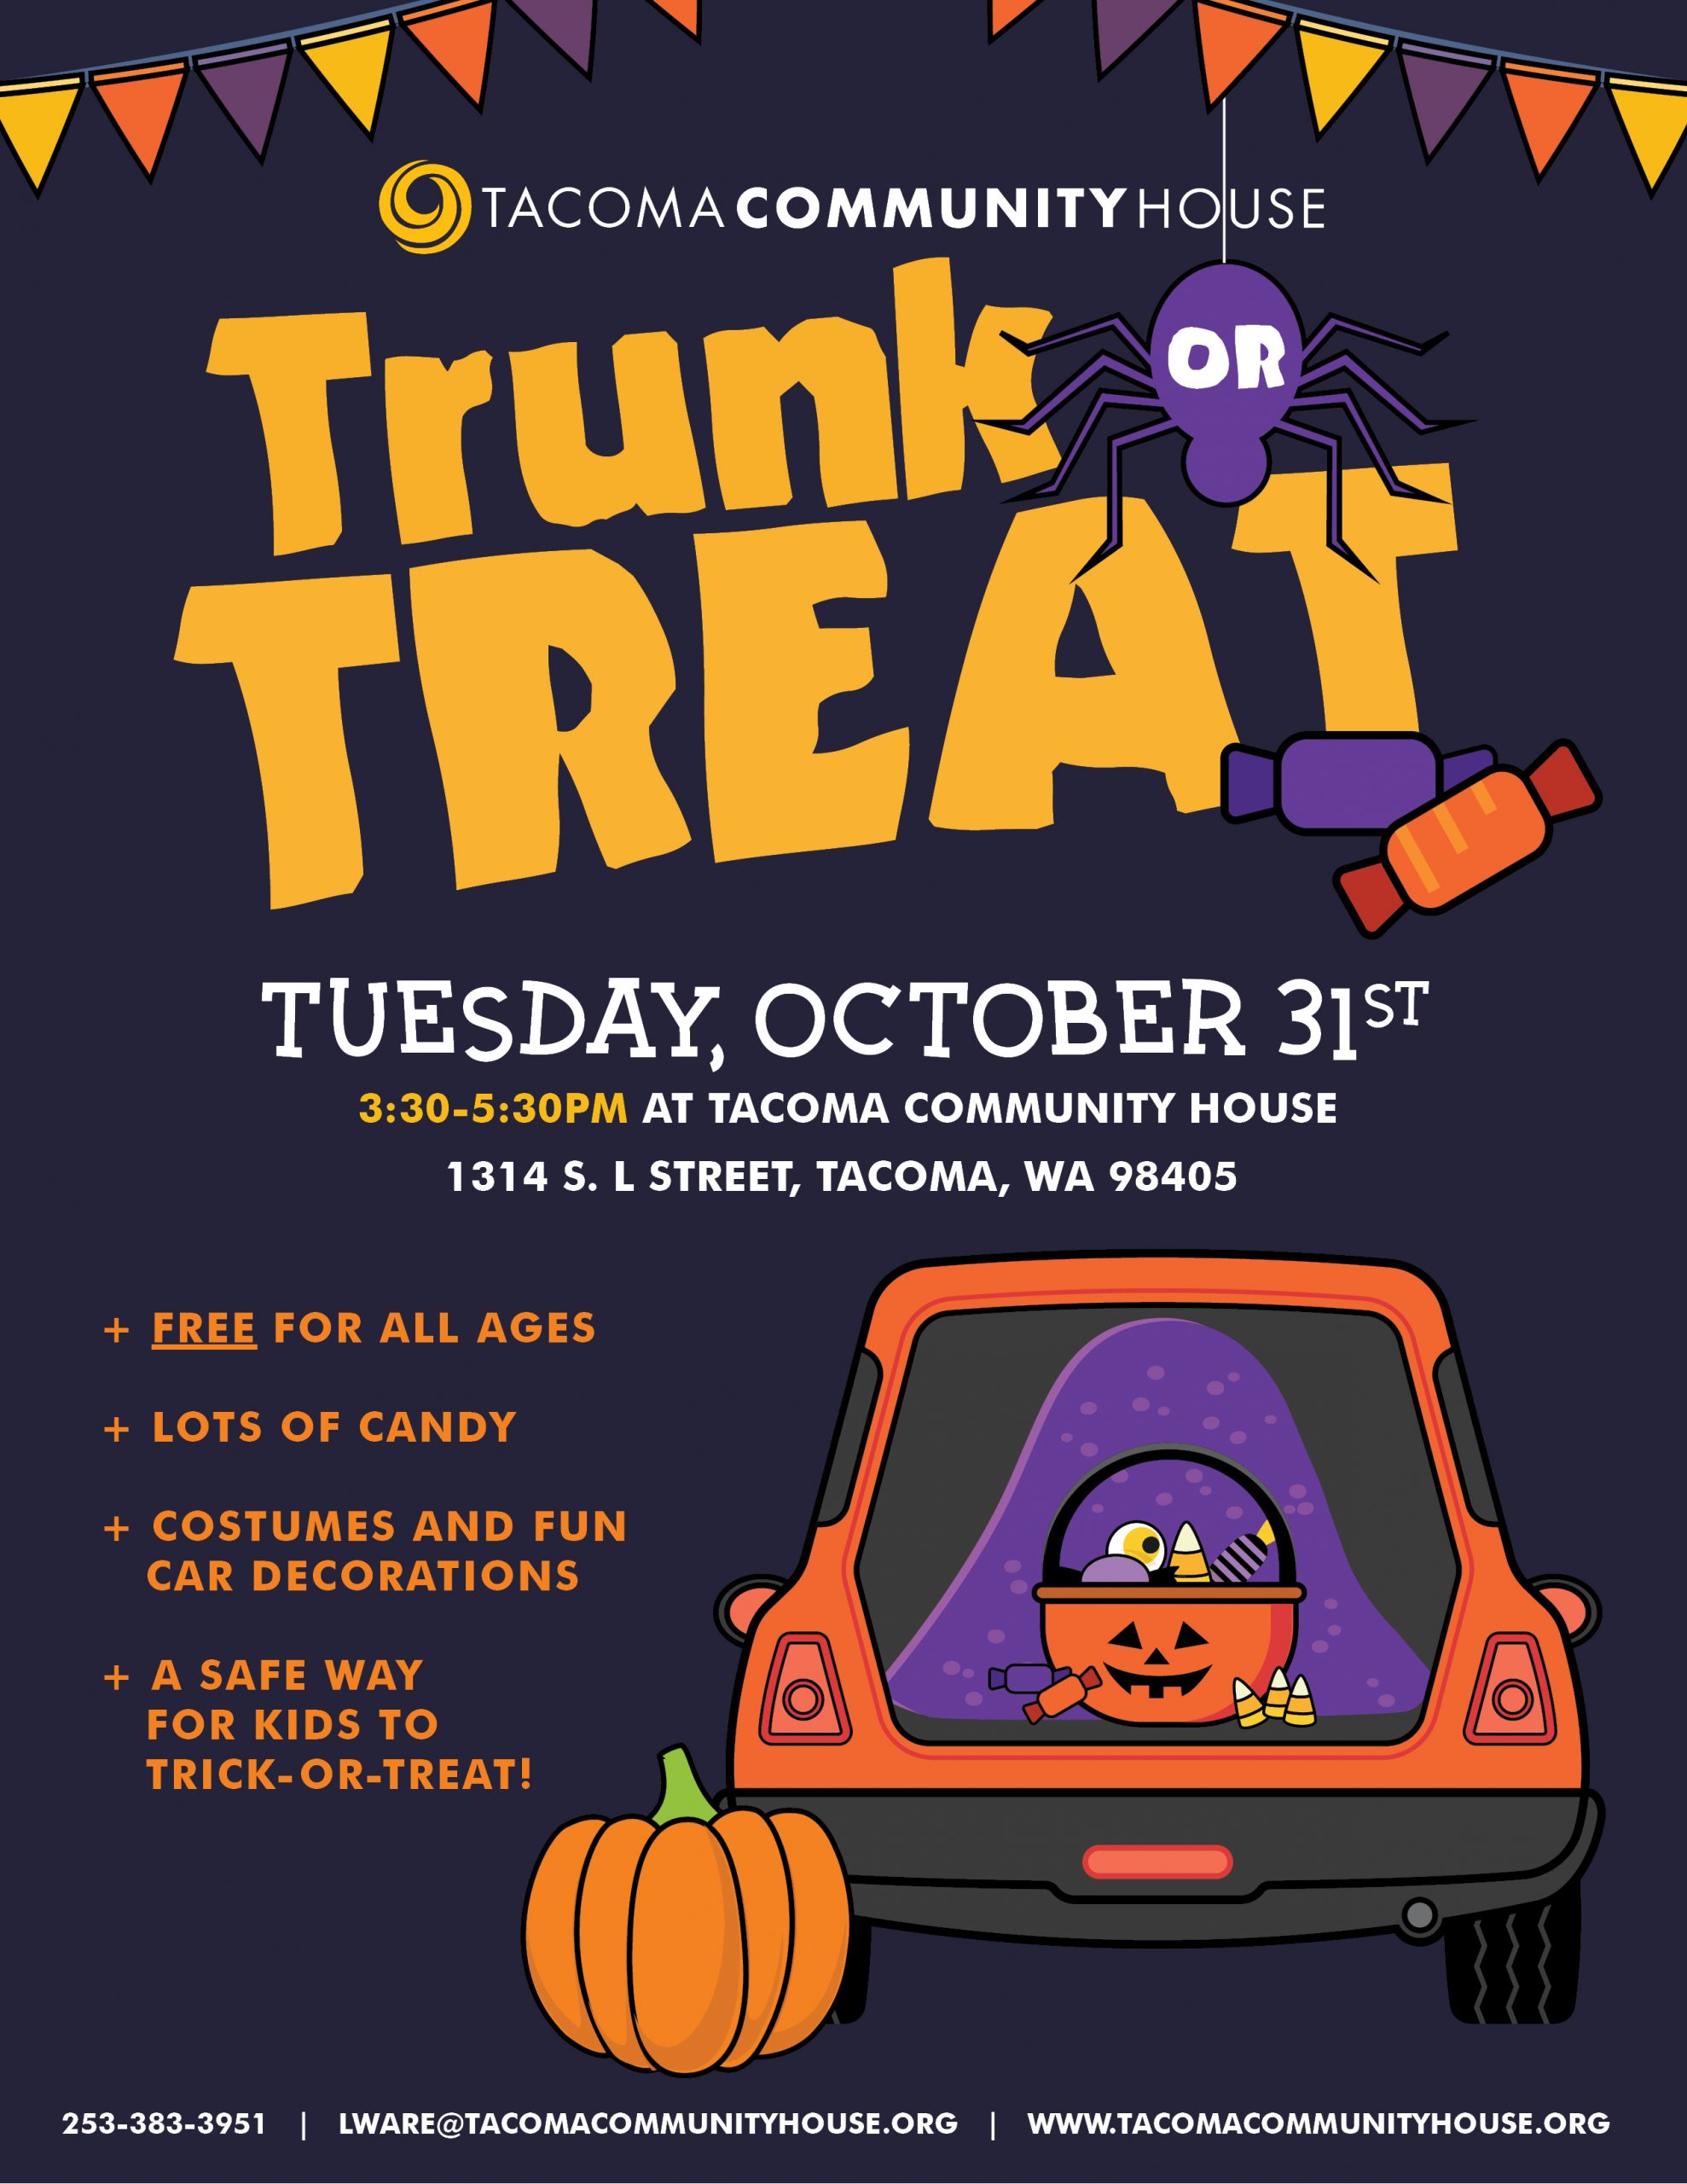 trunk or treat flyer template free, free printable trunk or treat flyer template, halloween trunk or treat flyer template, trunk or treat flyer ideas, free trunk or treat templates, editable trunk or treat flyer, printable trunk or treat flyer, trunk or treat flyer images, church trunk or treat flyers